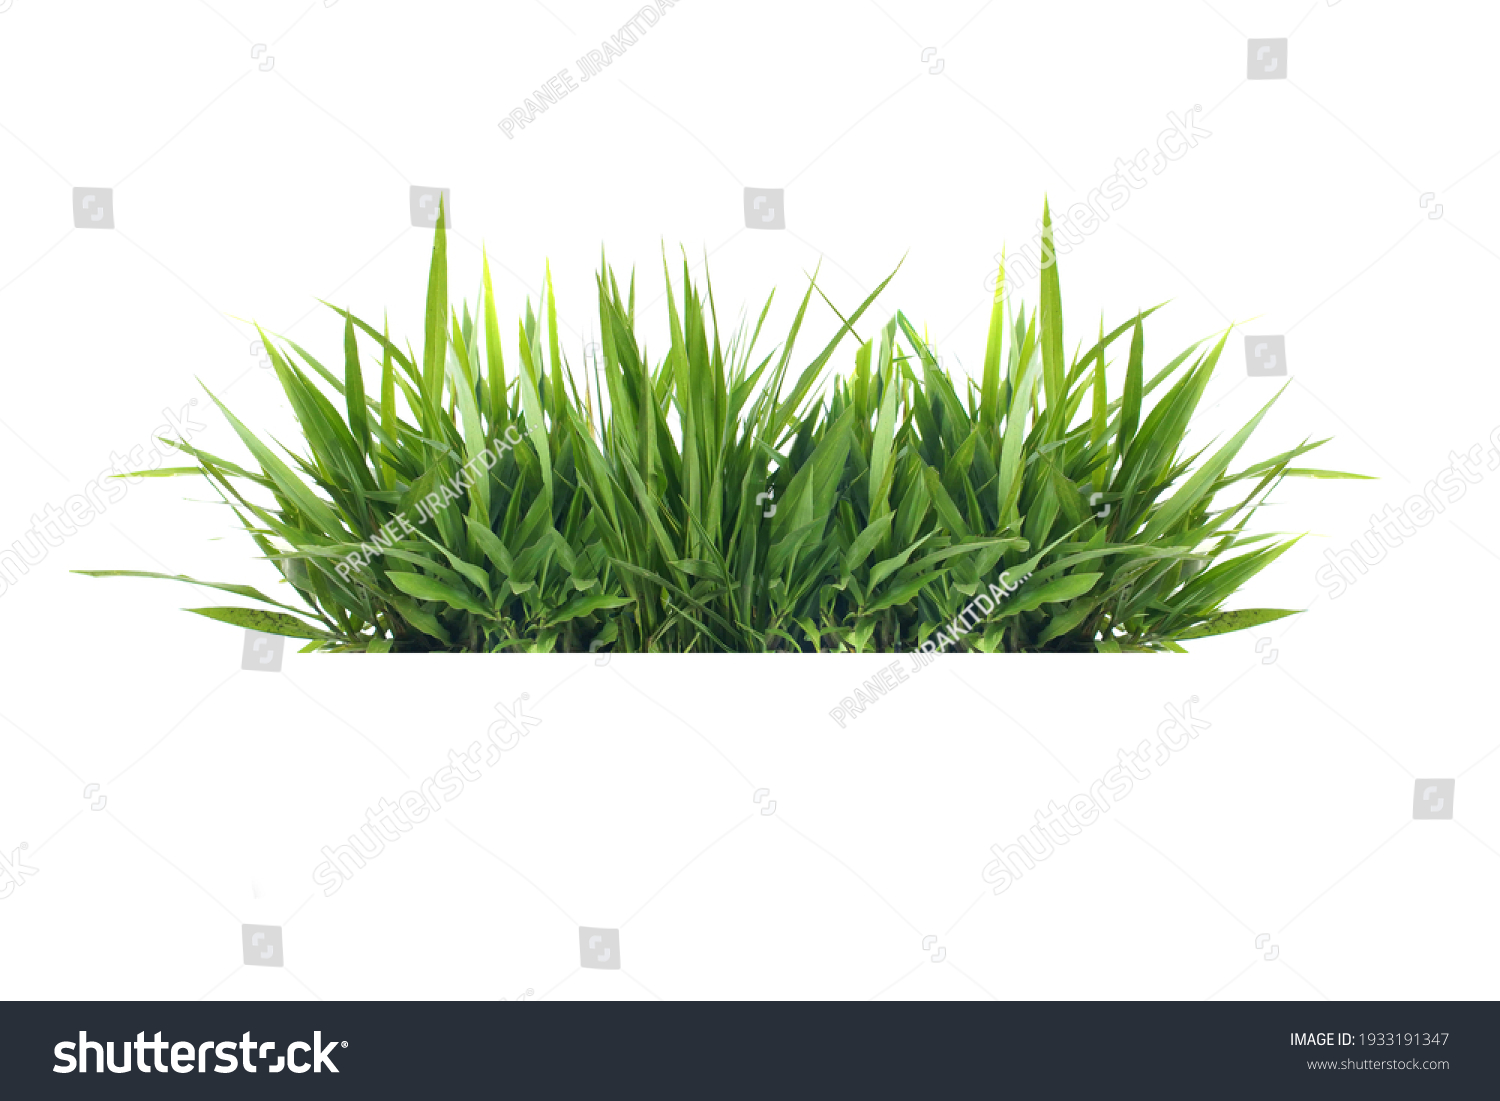 Isolated green grass on a white background                               #1933191347